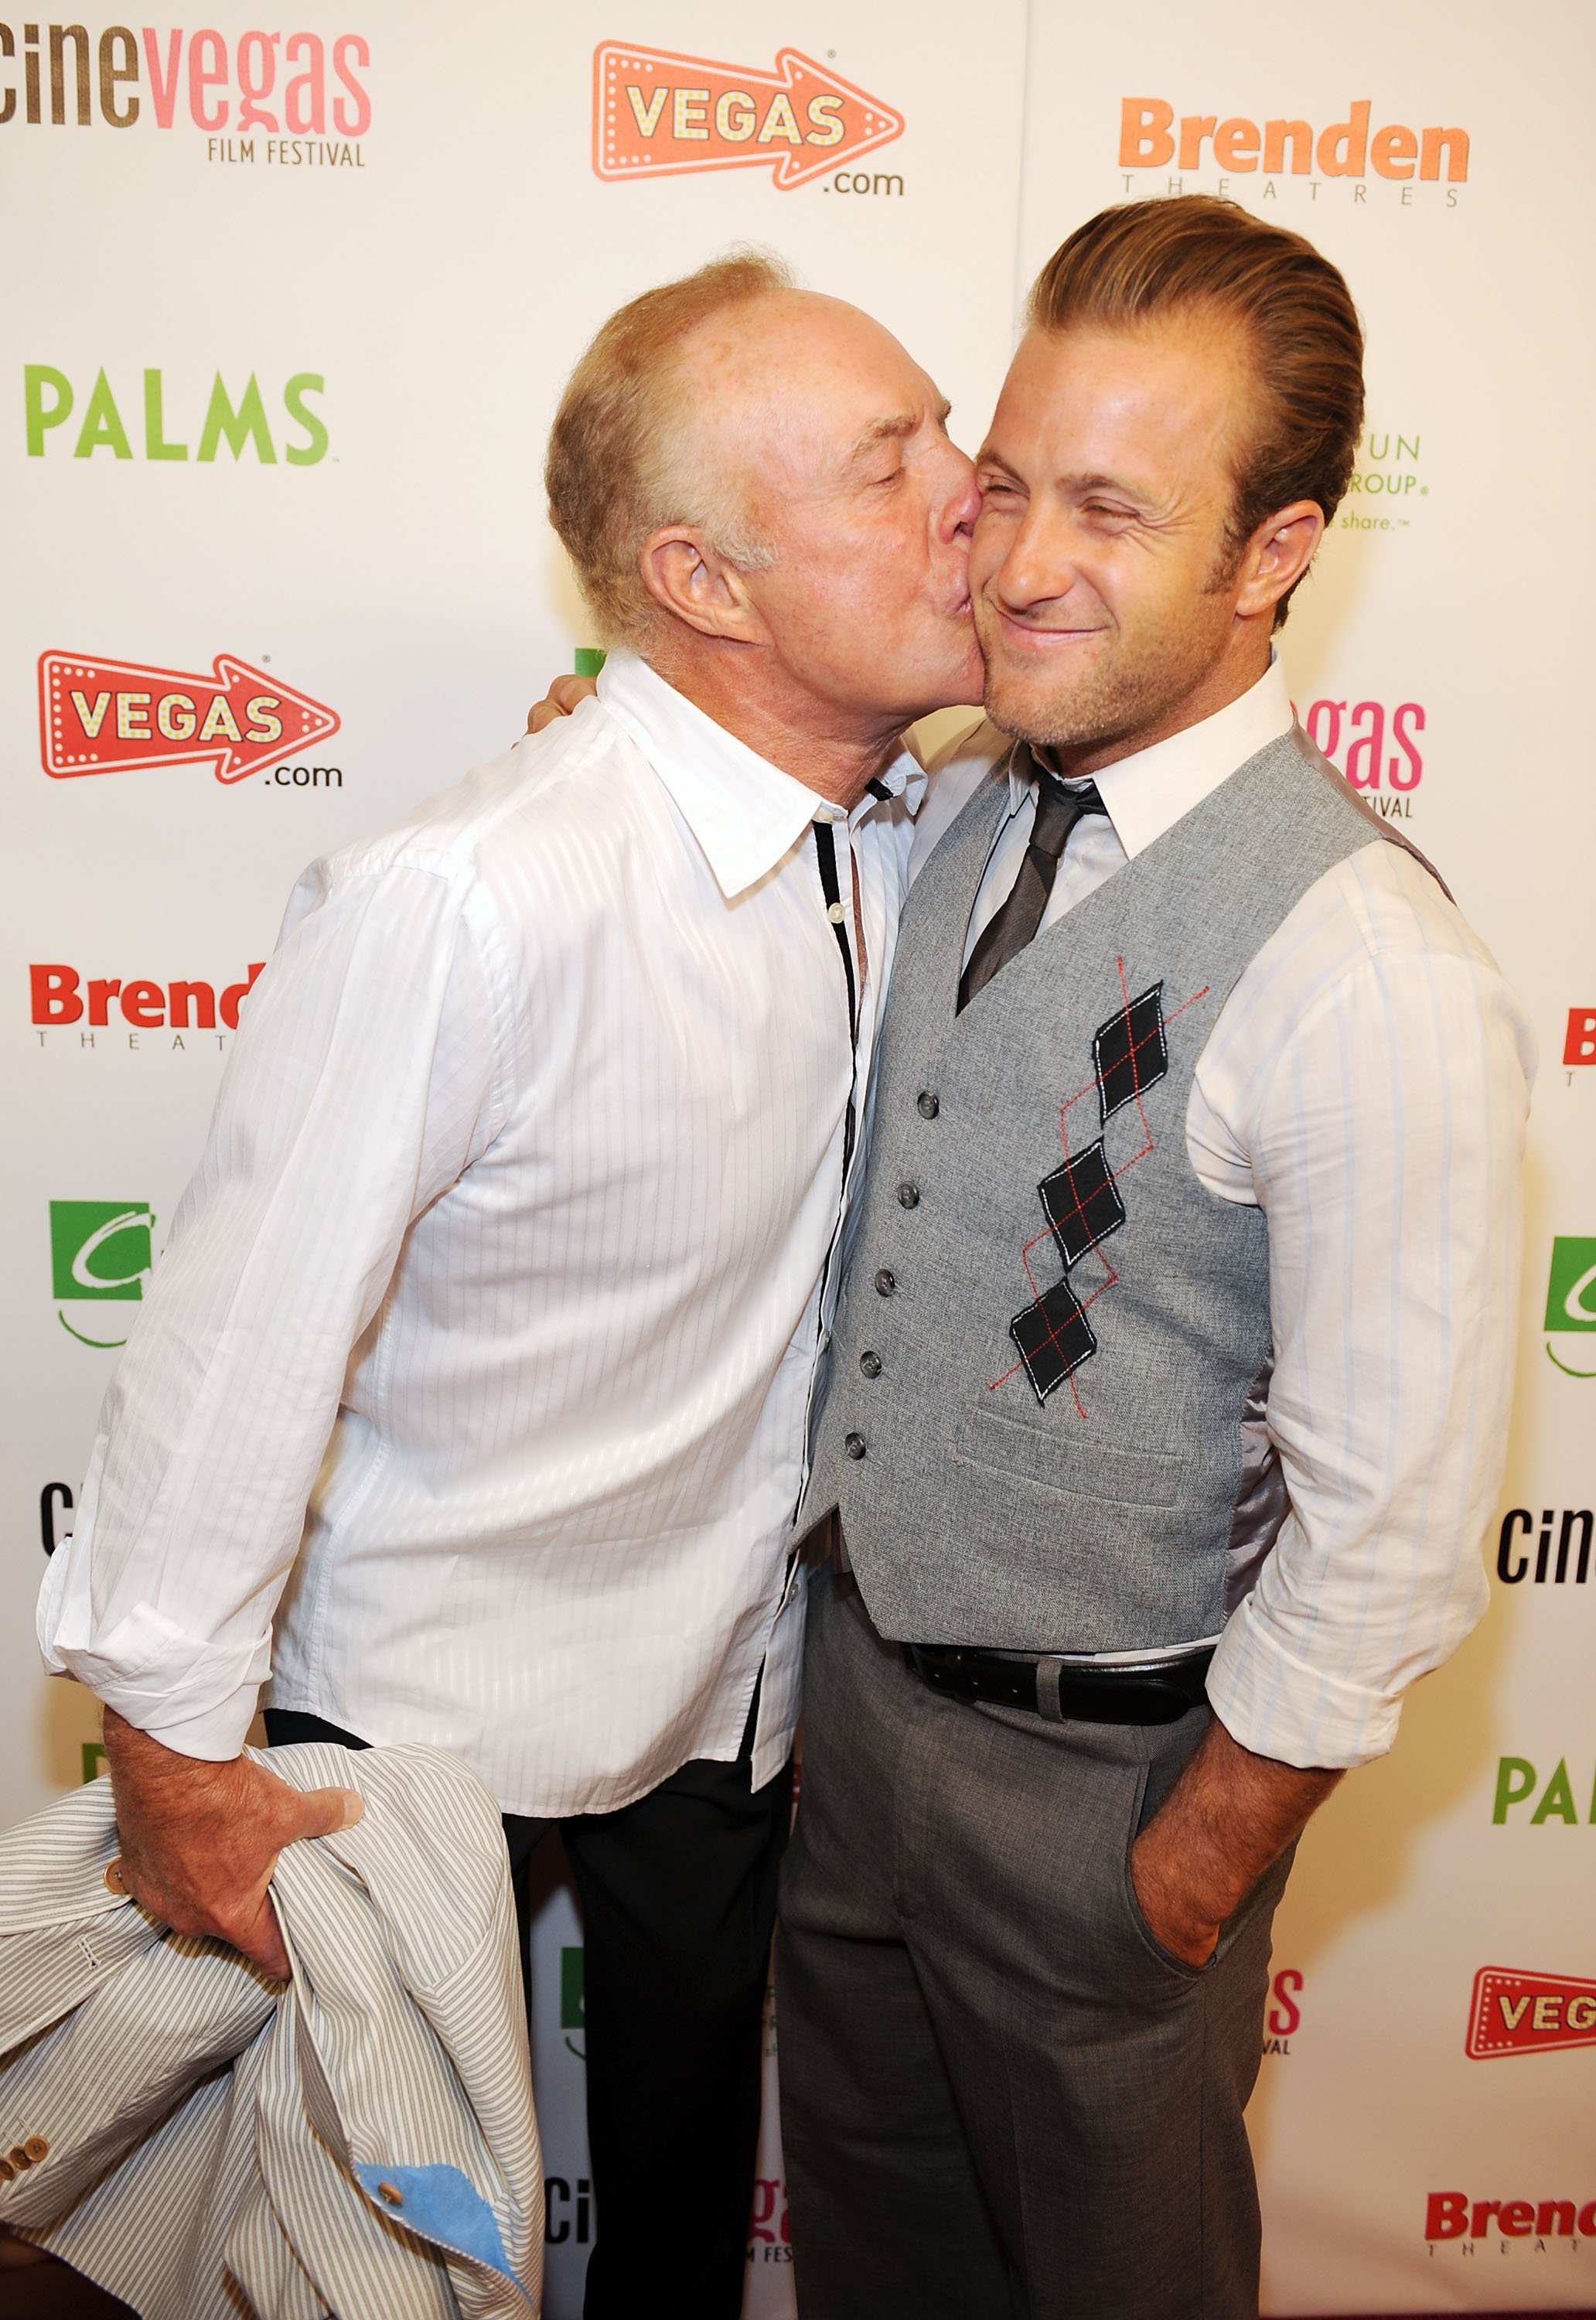 James and Scott Caan at the "Mercy" red carpet during the 11th annual CineVegas film festival on June 14, 2009, in Las Vegas, Nevada. | Source: Getty Images